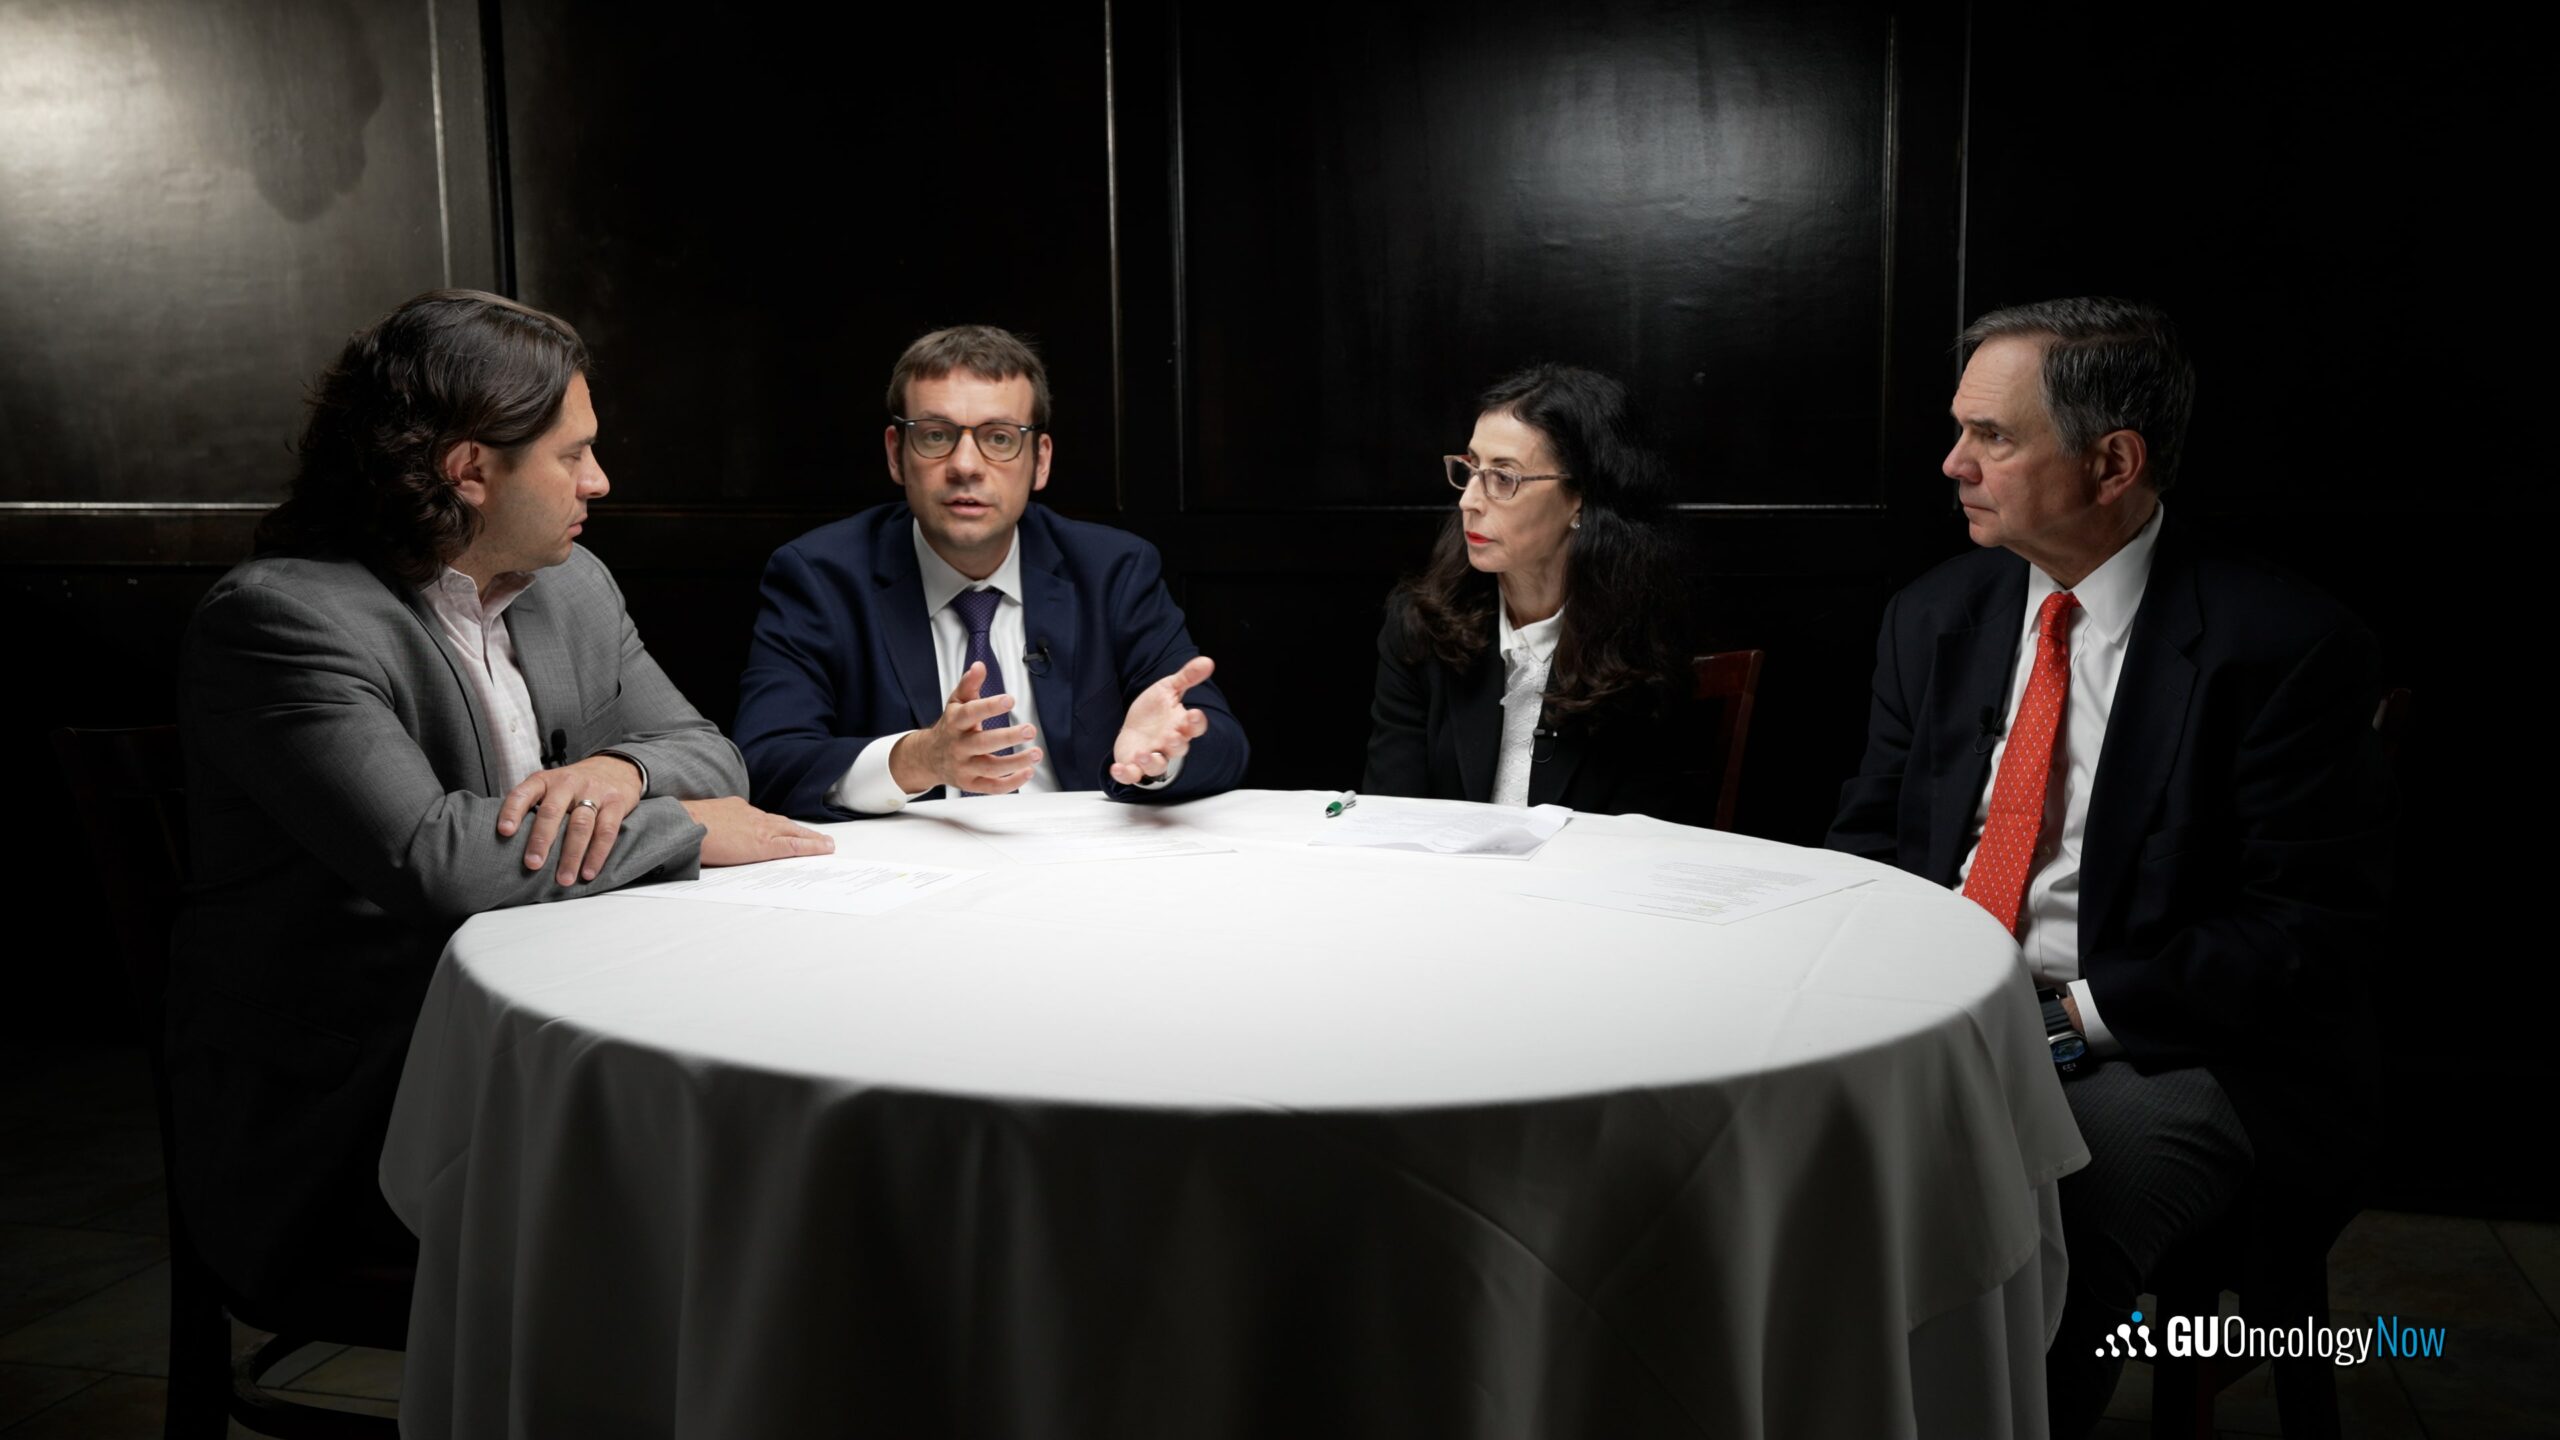 Panelists Discuss Treatment Approach for Patients With Cisplatin-Eligible Bladder Cancer